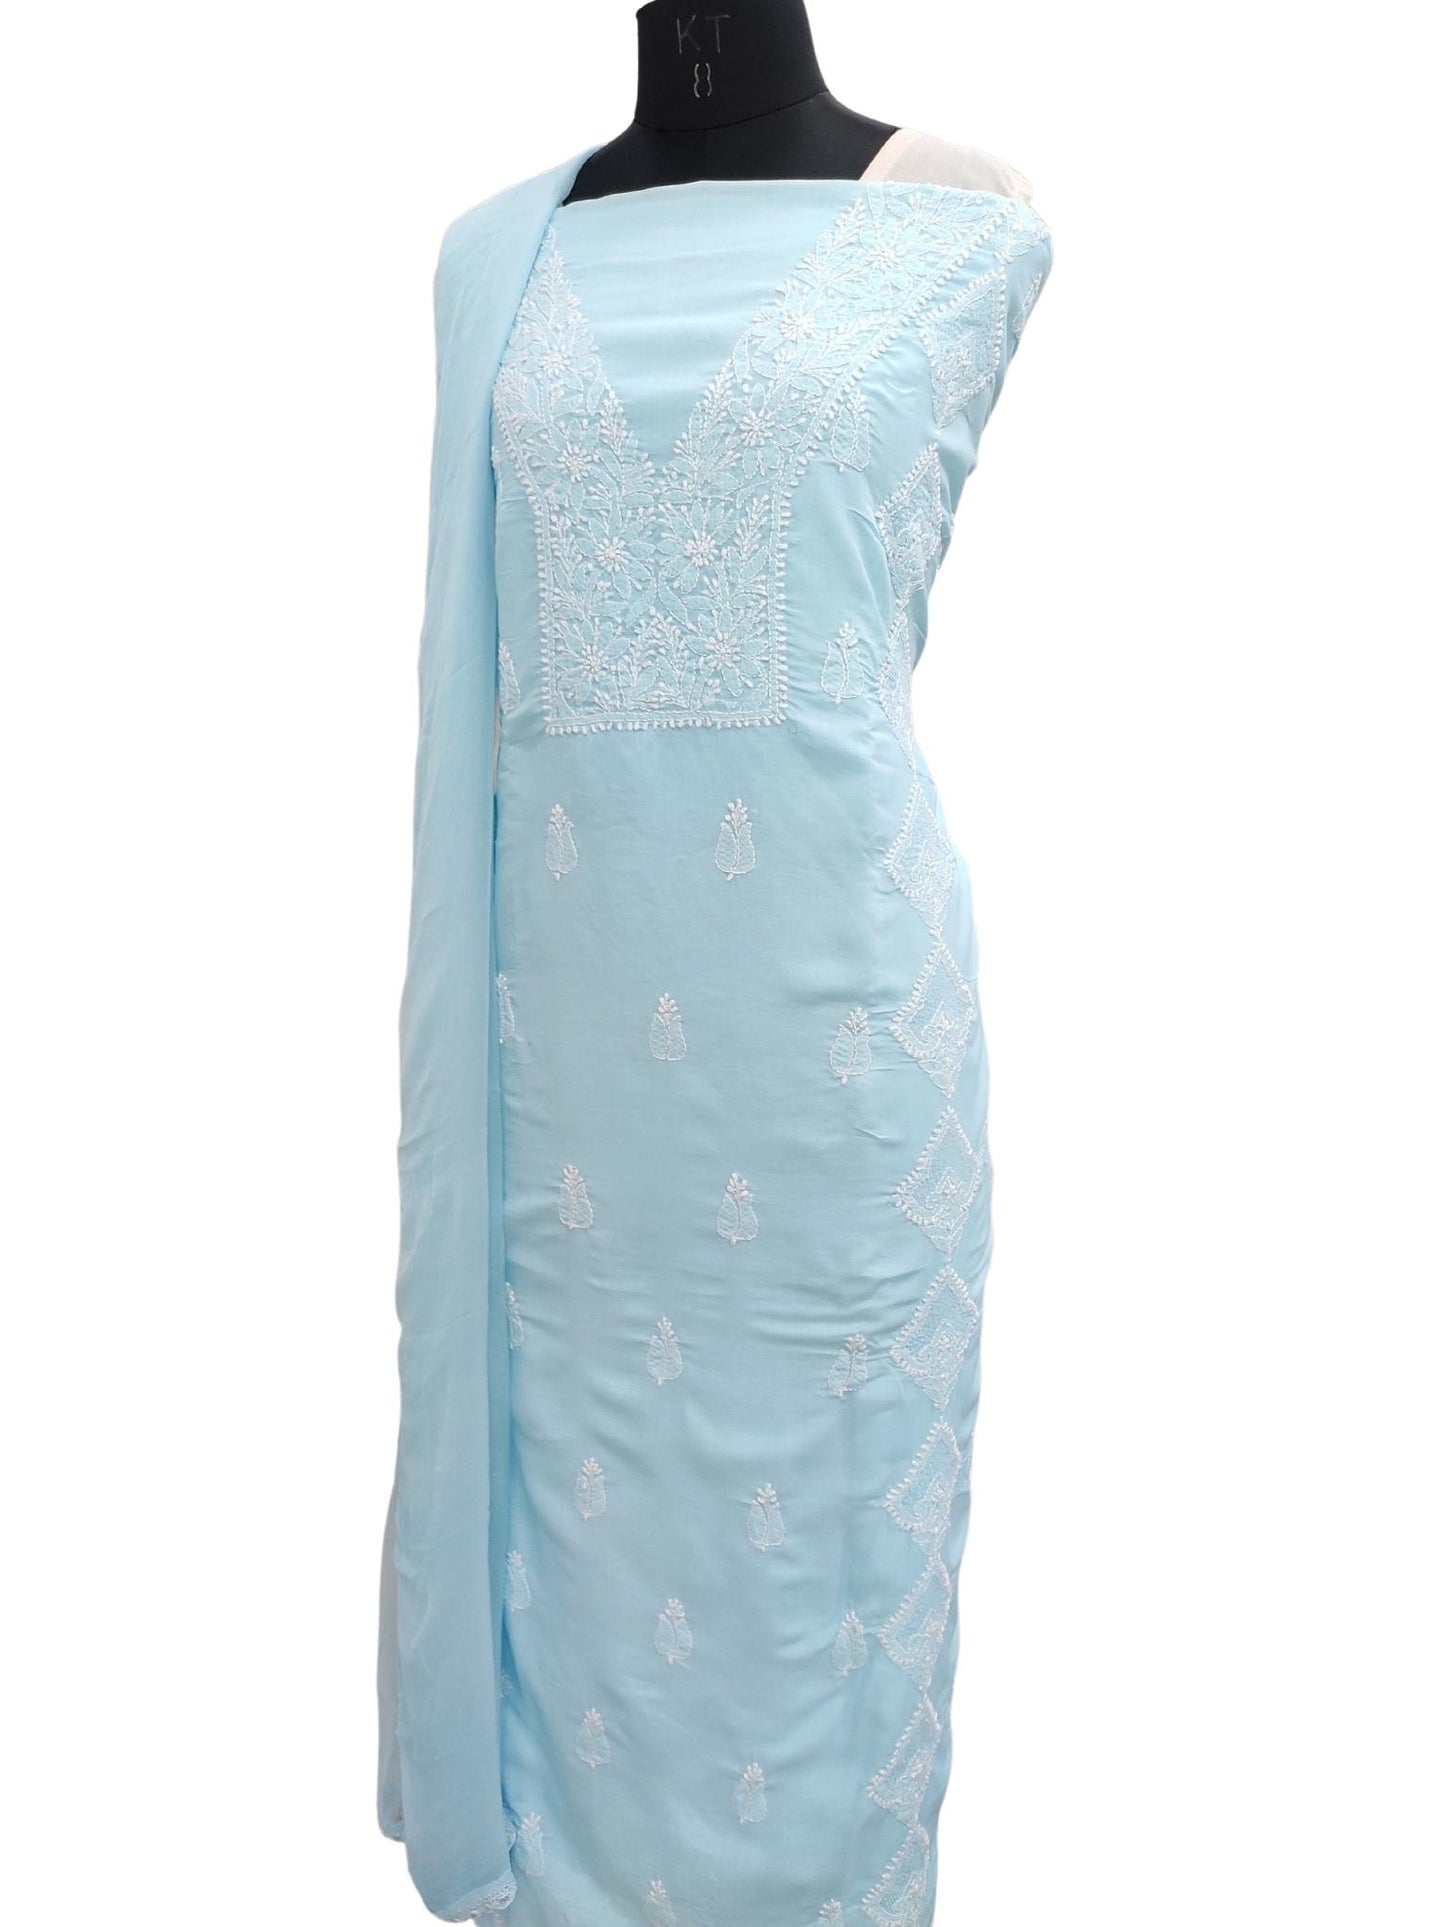 Shyamal Chikan Hand Embroidered Blue Cotton Lucknowi Chikankari Unstitched Suit Piece With Jaali Work - S19291